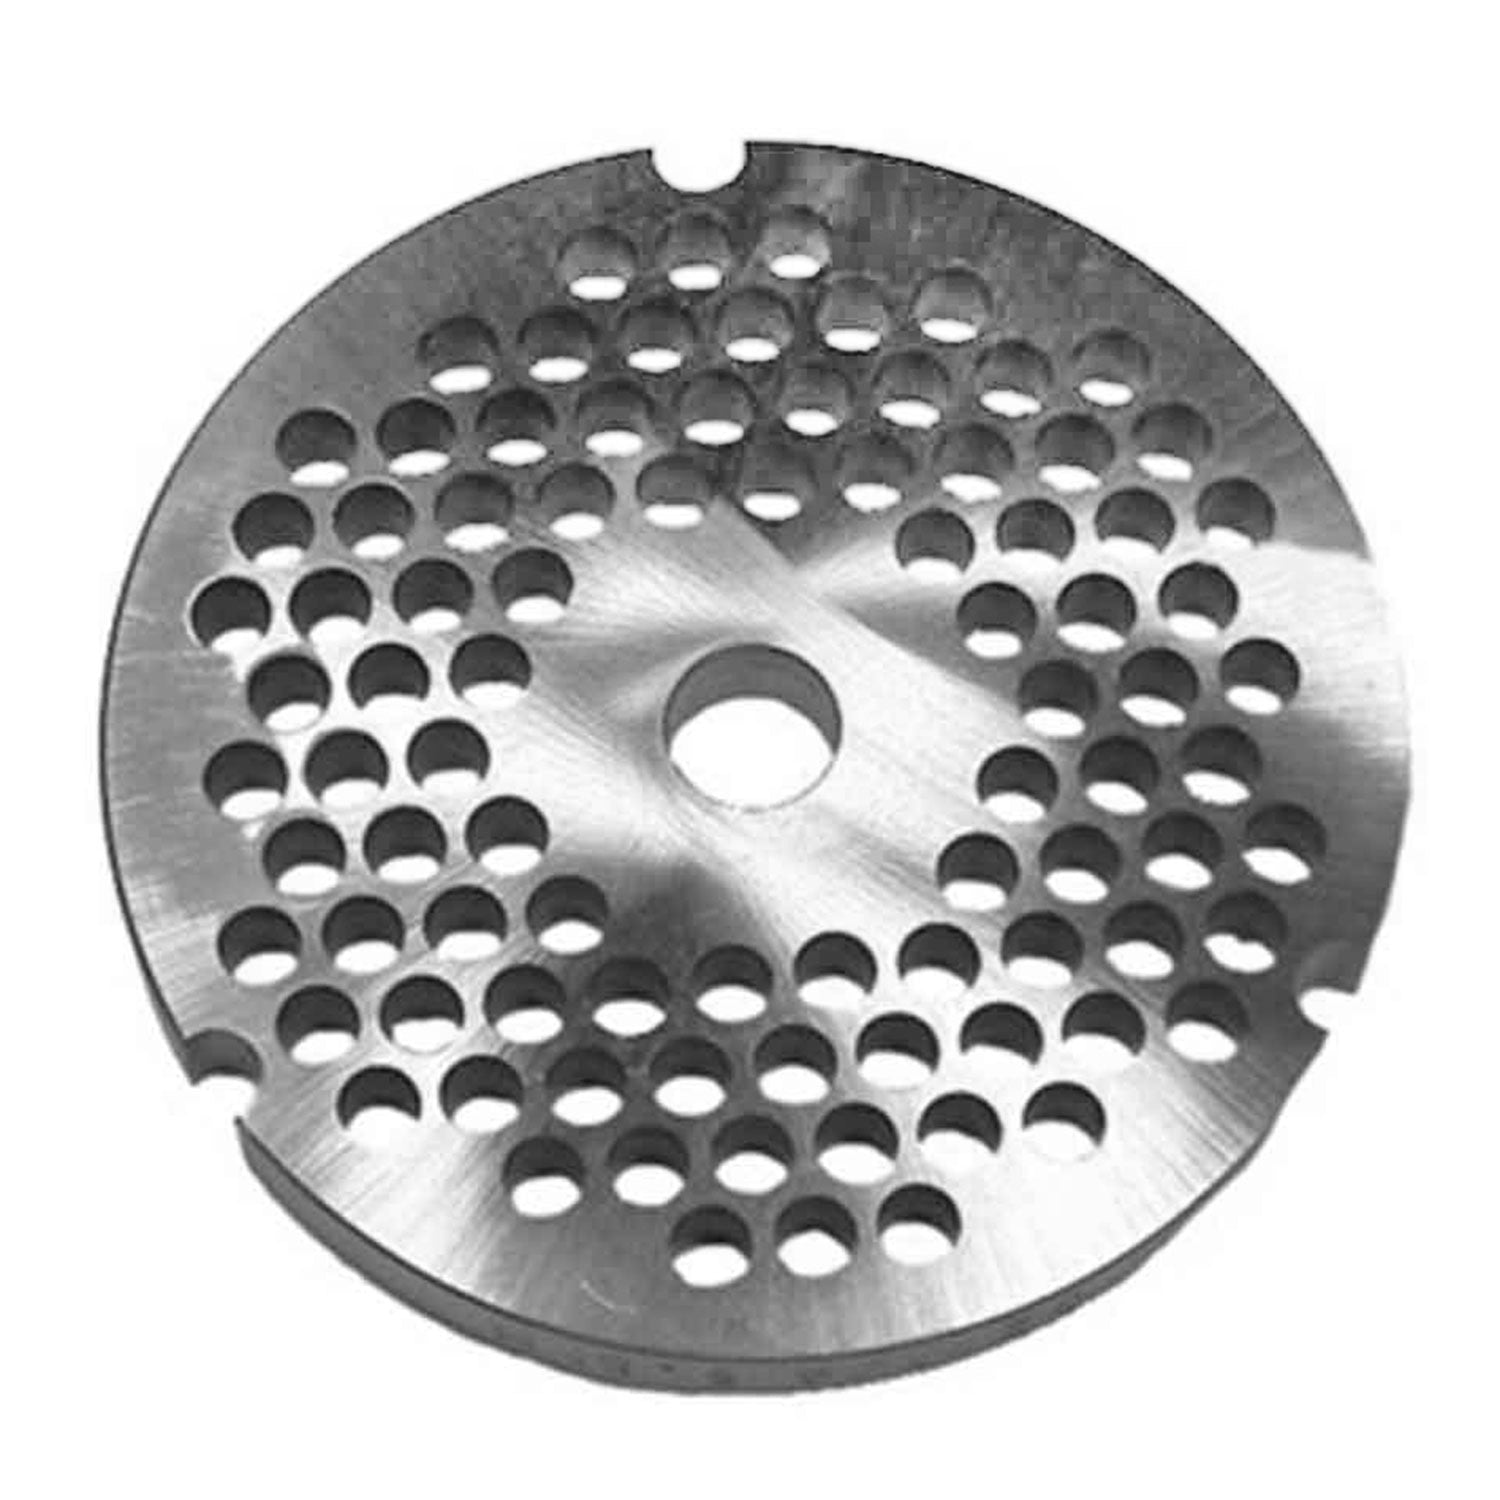 Size 56 DC Reversible Meat Grinder Plate, 3/8